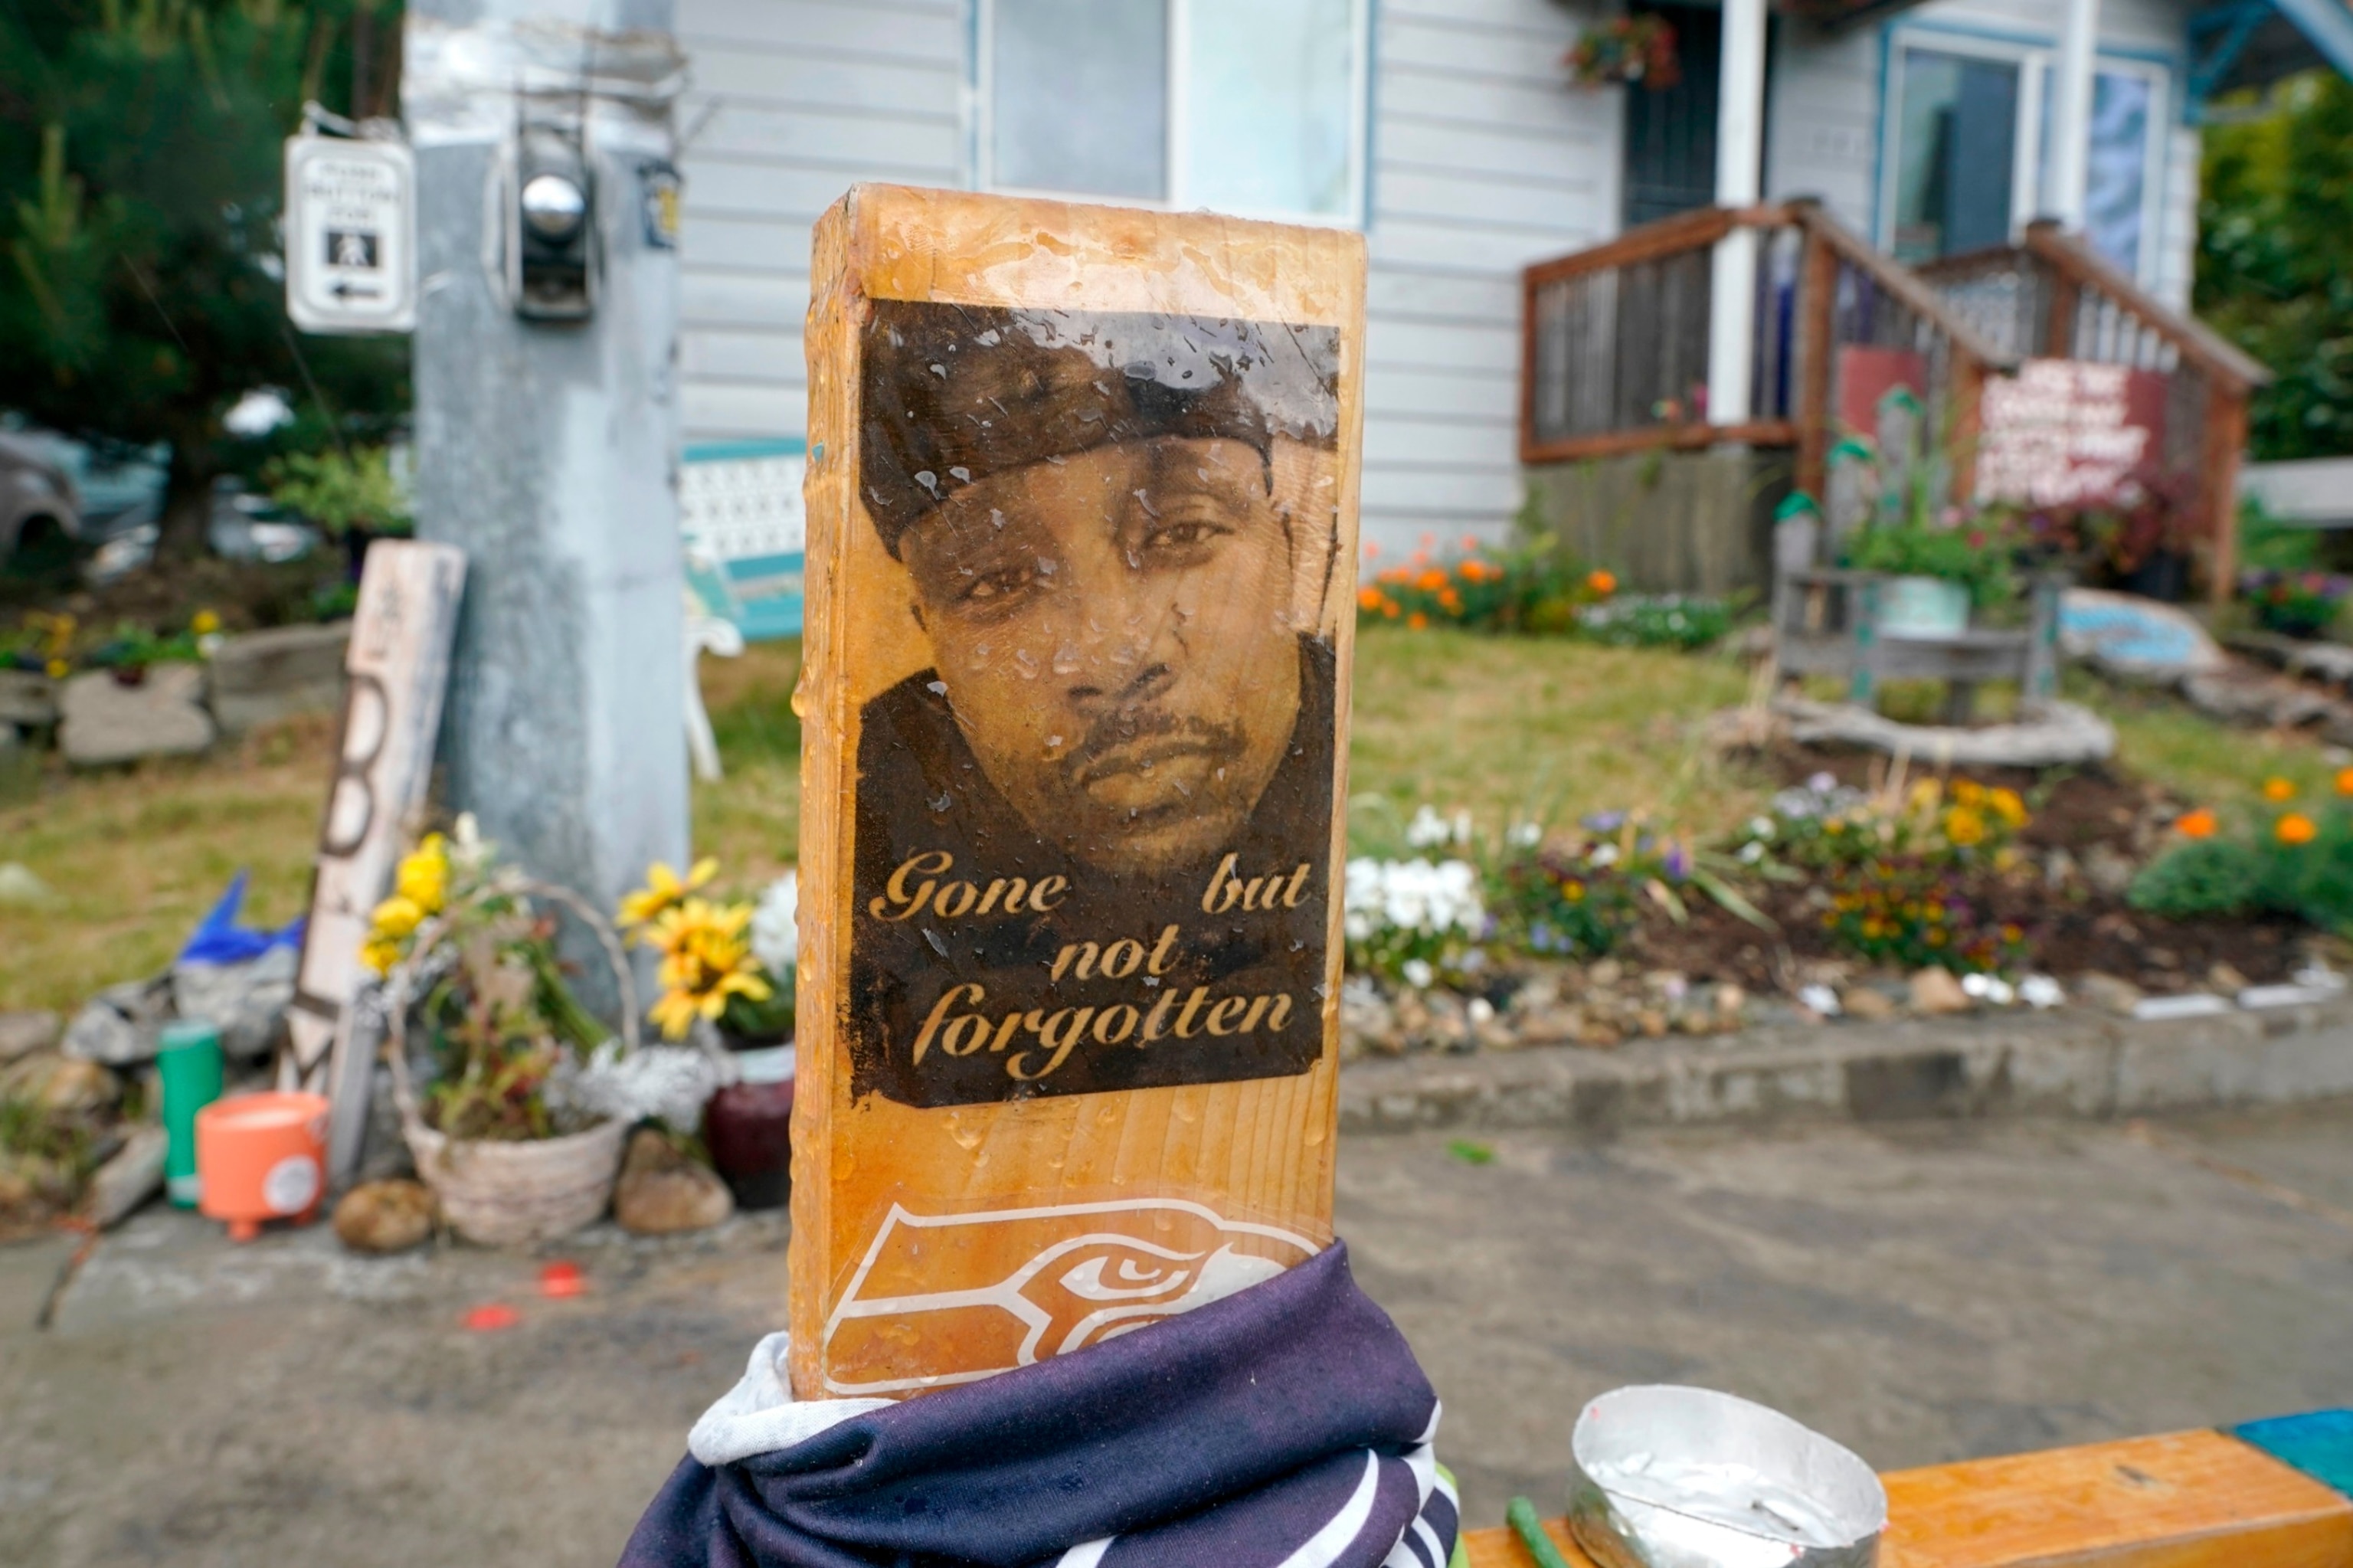 PHOTO: A sign is displayed, May 27, 2021, at a memorial in Tacoma, Wash., where Manuel "Manny" Ellis died March 3, 2020, after he was restrained by police officers. 